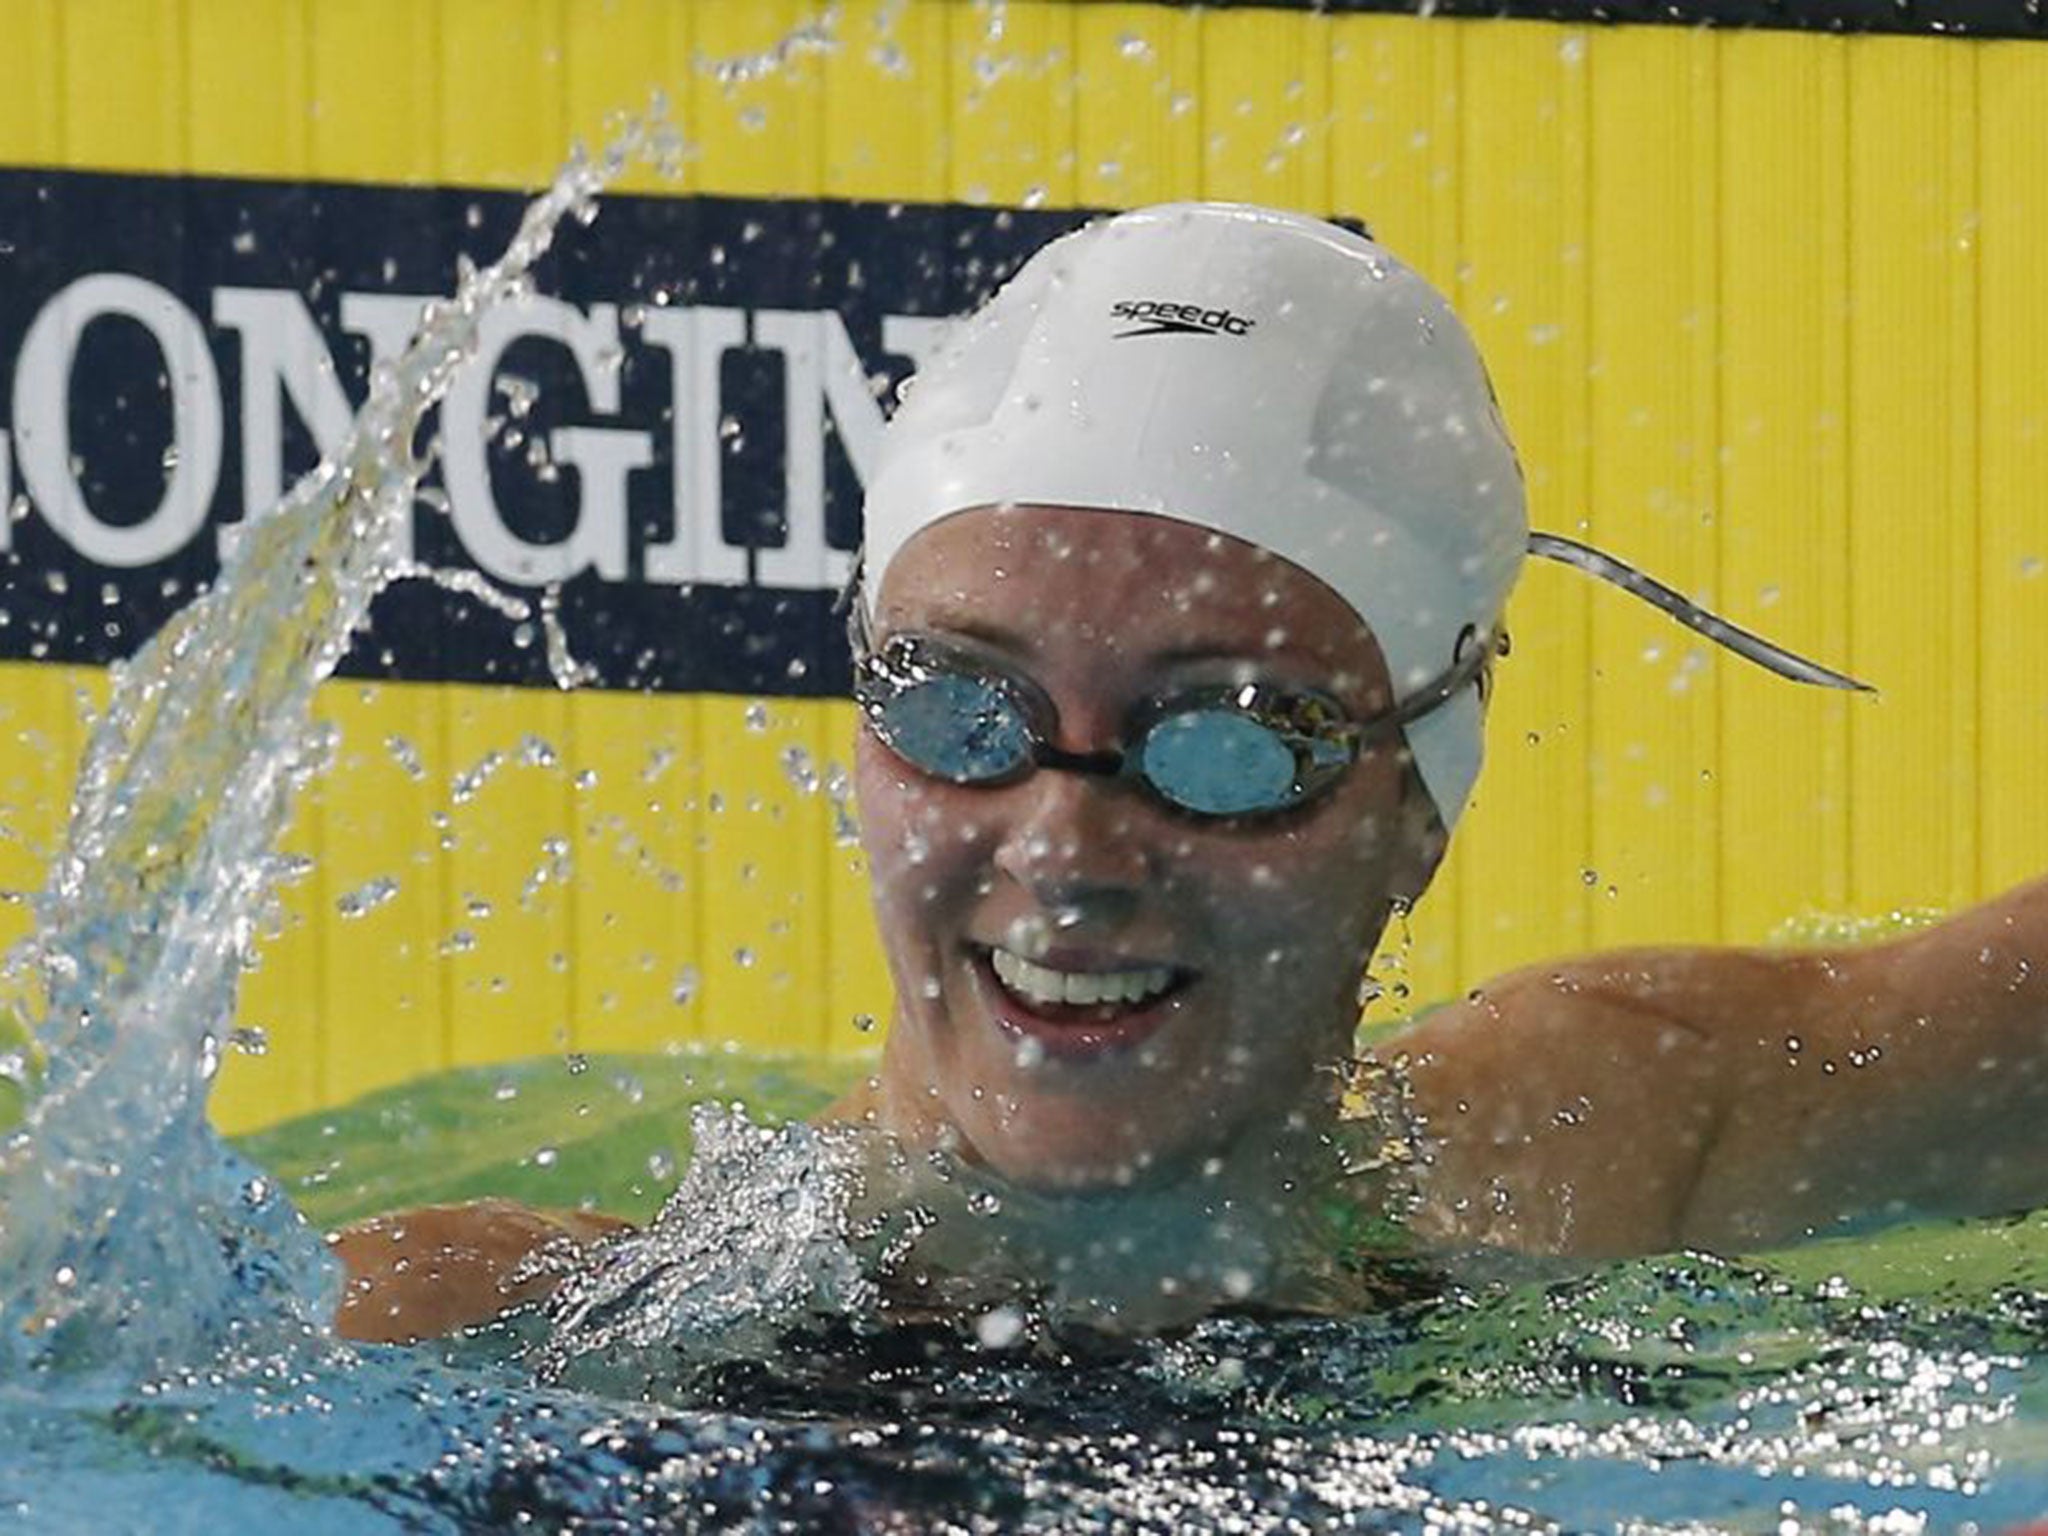 Jazz Carlin looks simply delighted after her win in the 800m freestyle final